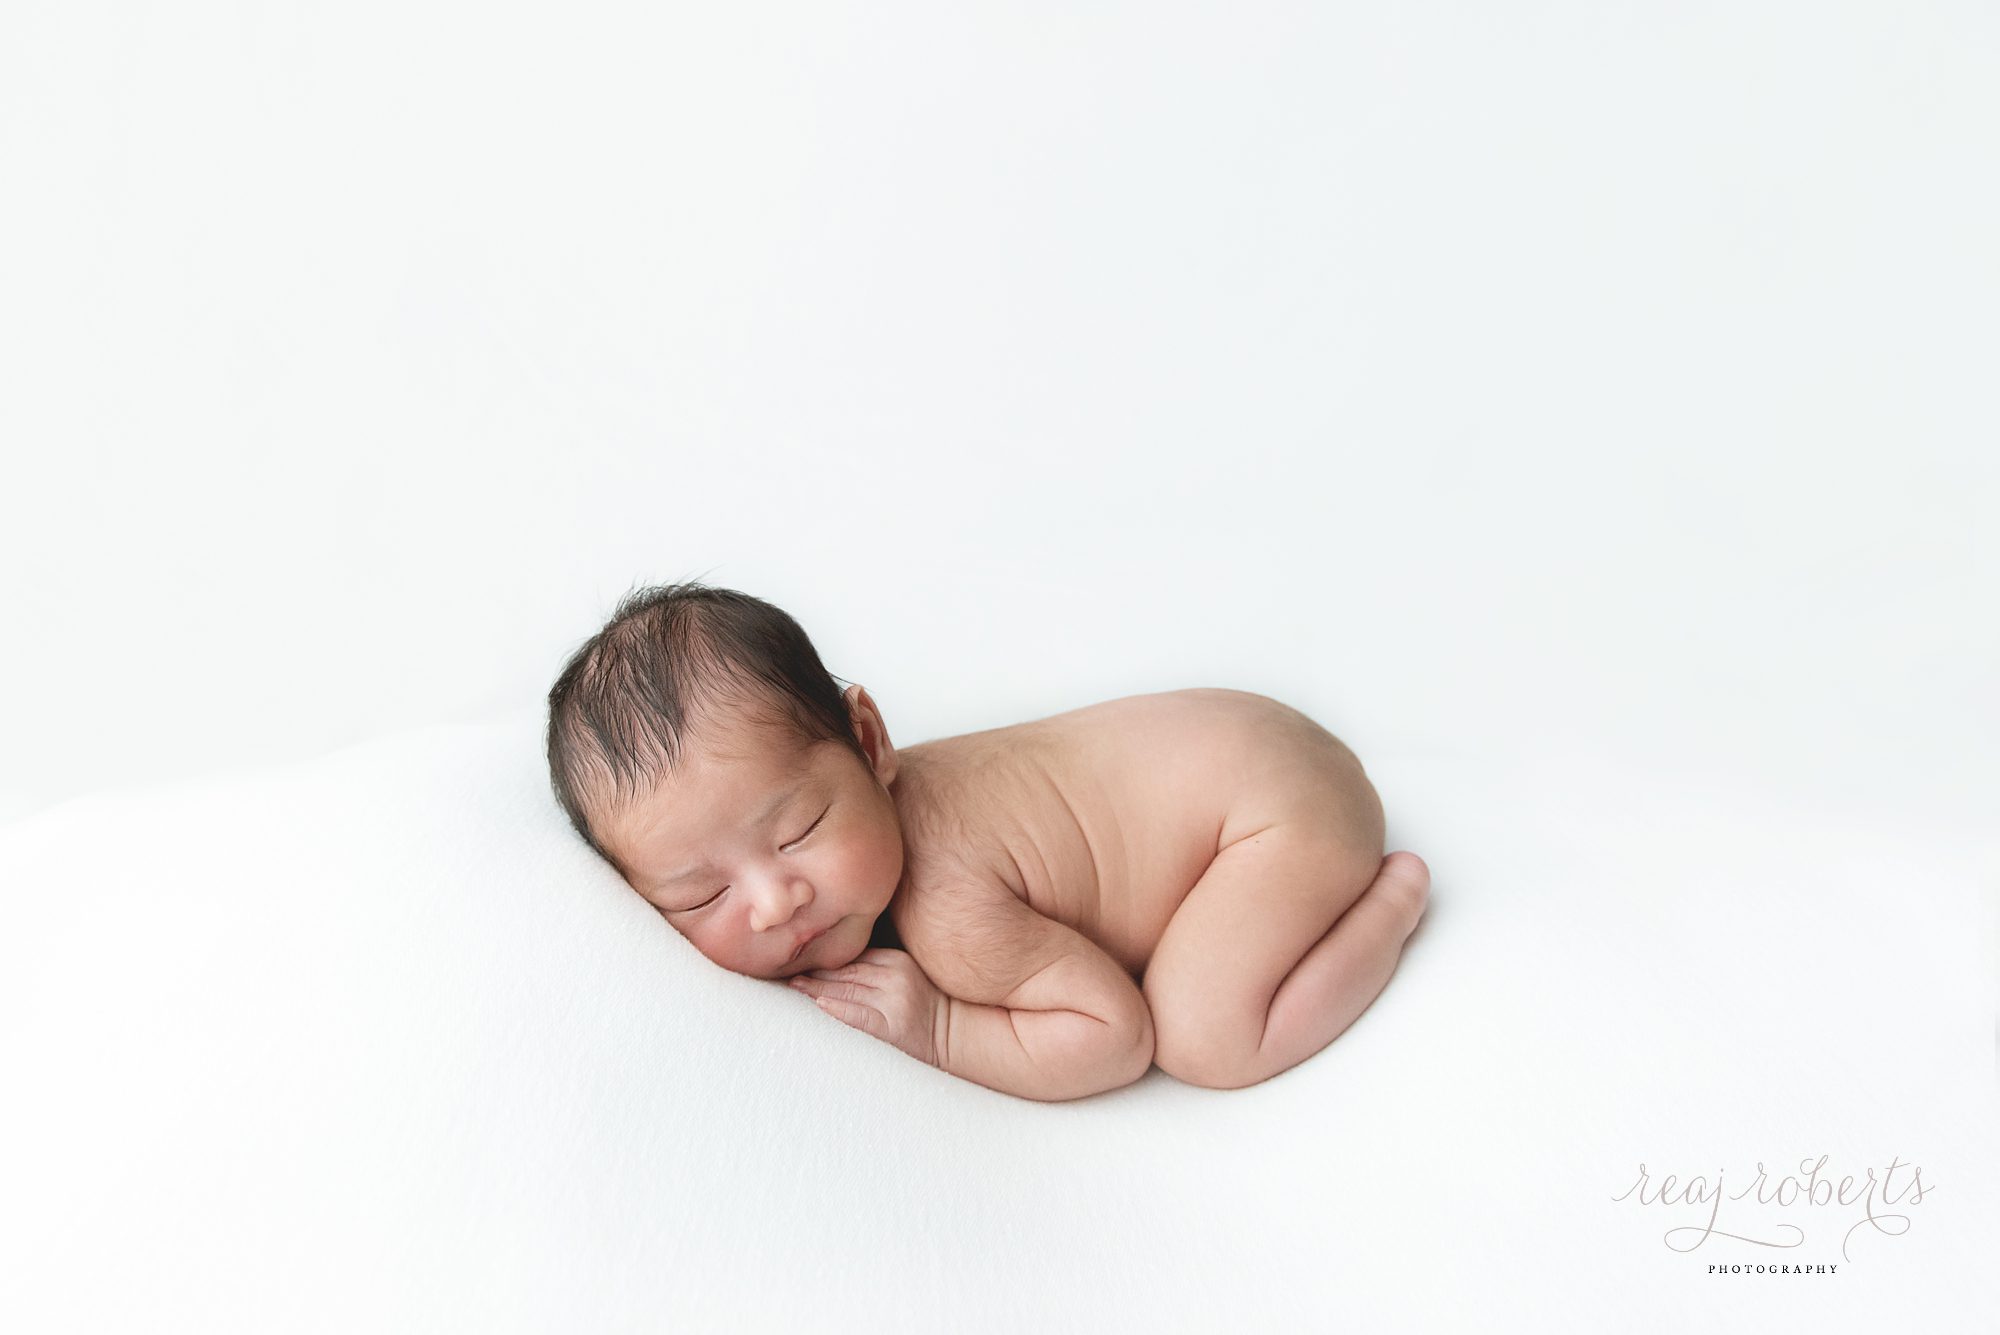 simple clean modern timeless newborn photos of baby on tummy | Reaj Roberts Photography